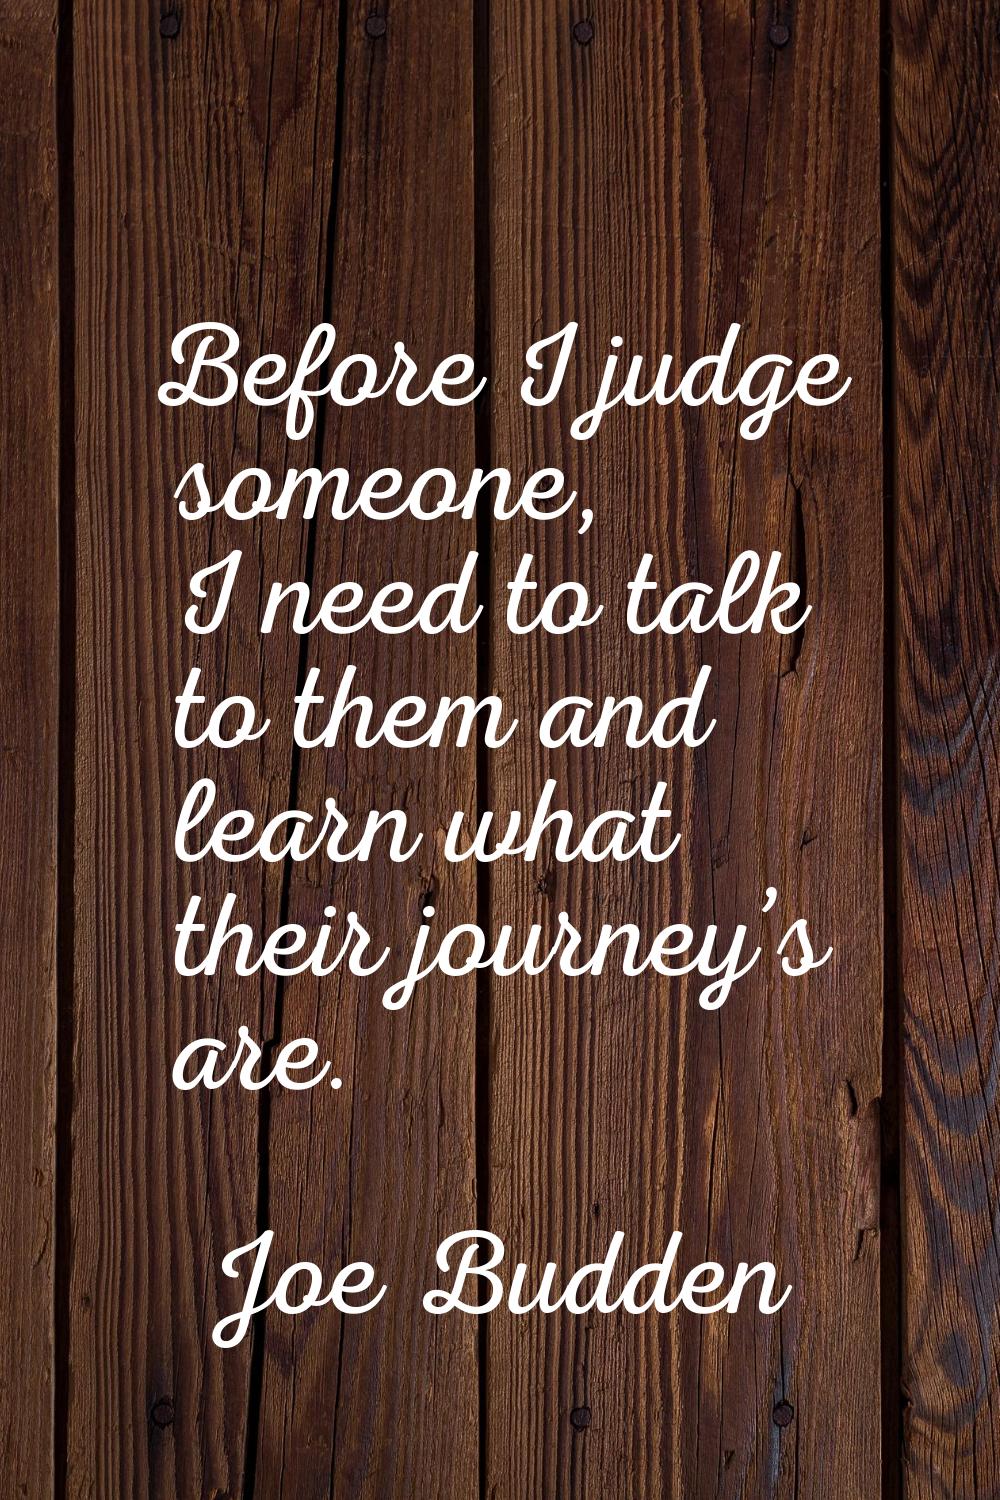 Before I judge someone, I need to talk to them and learn what their journey’s are.